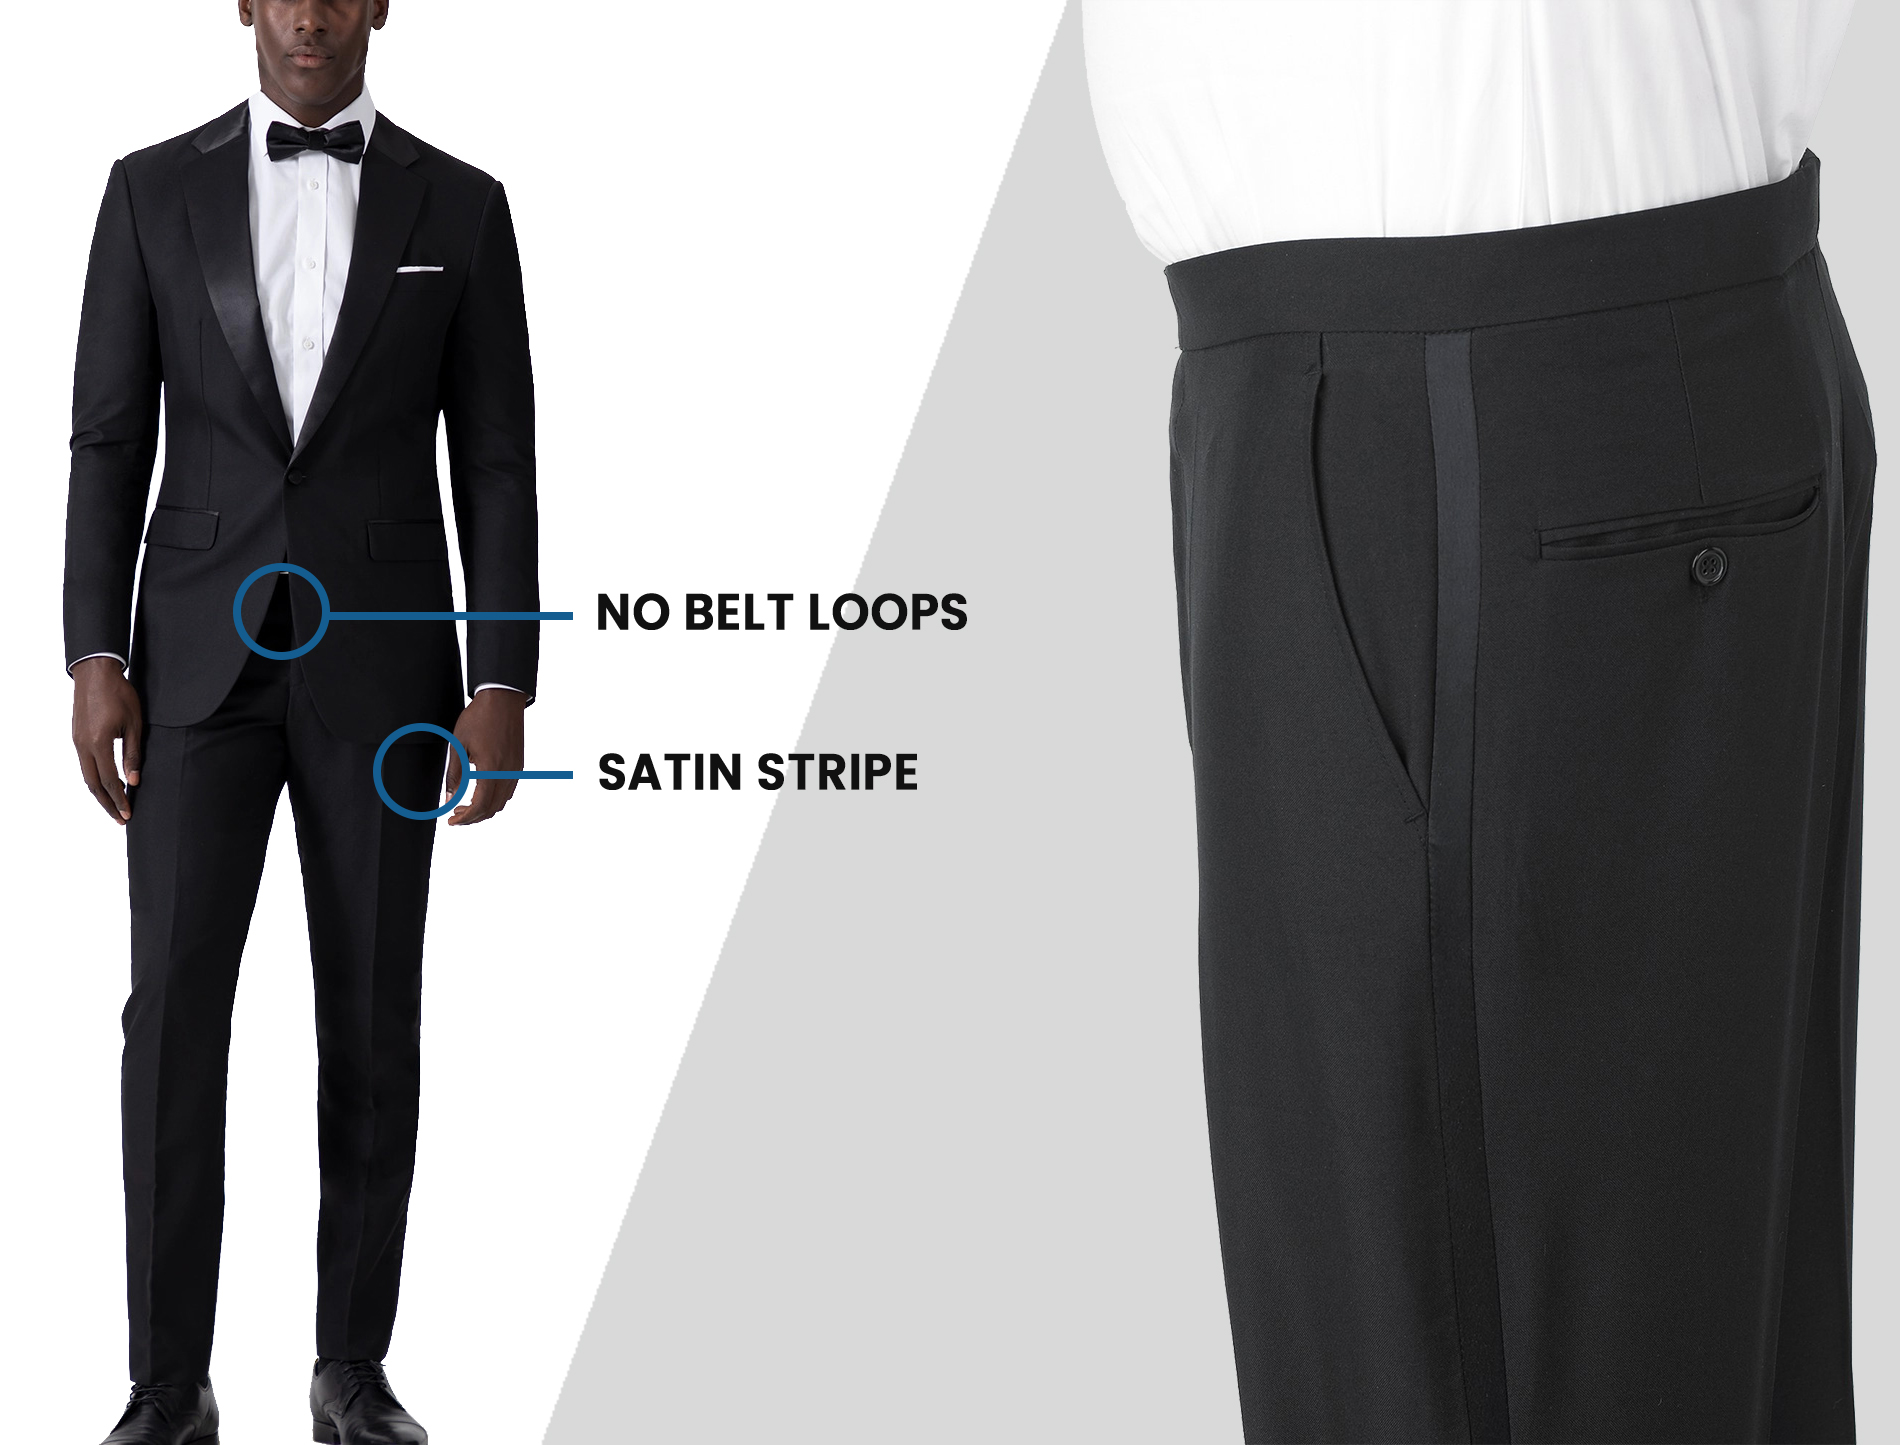 tuxedo pants does not have belt loops